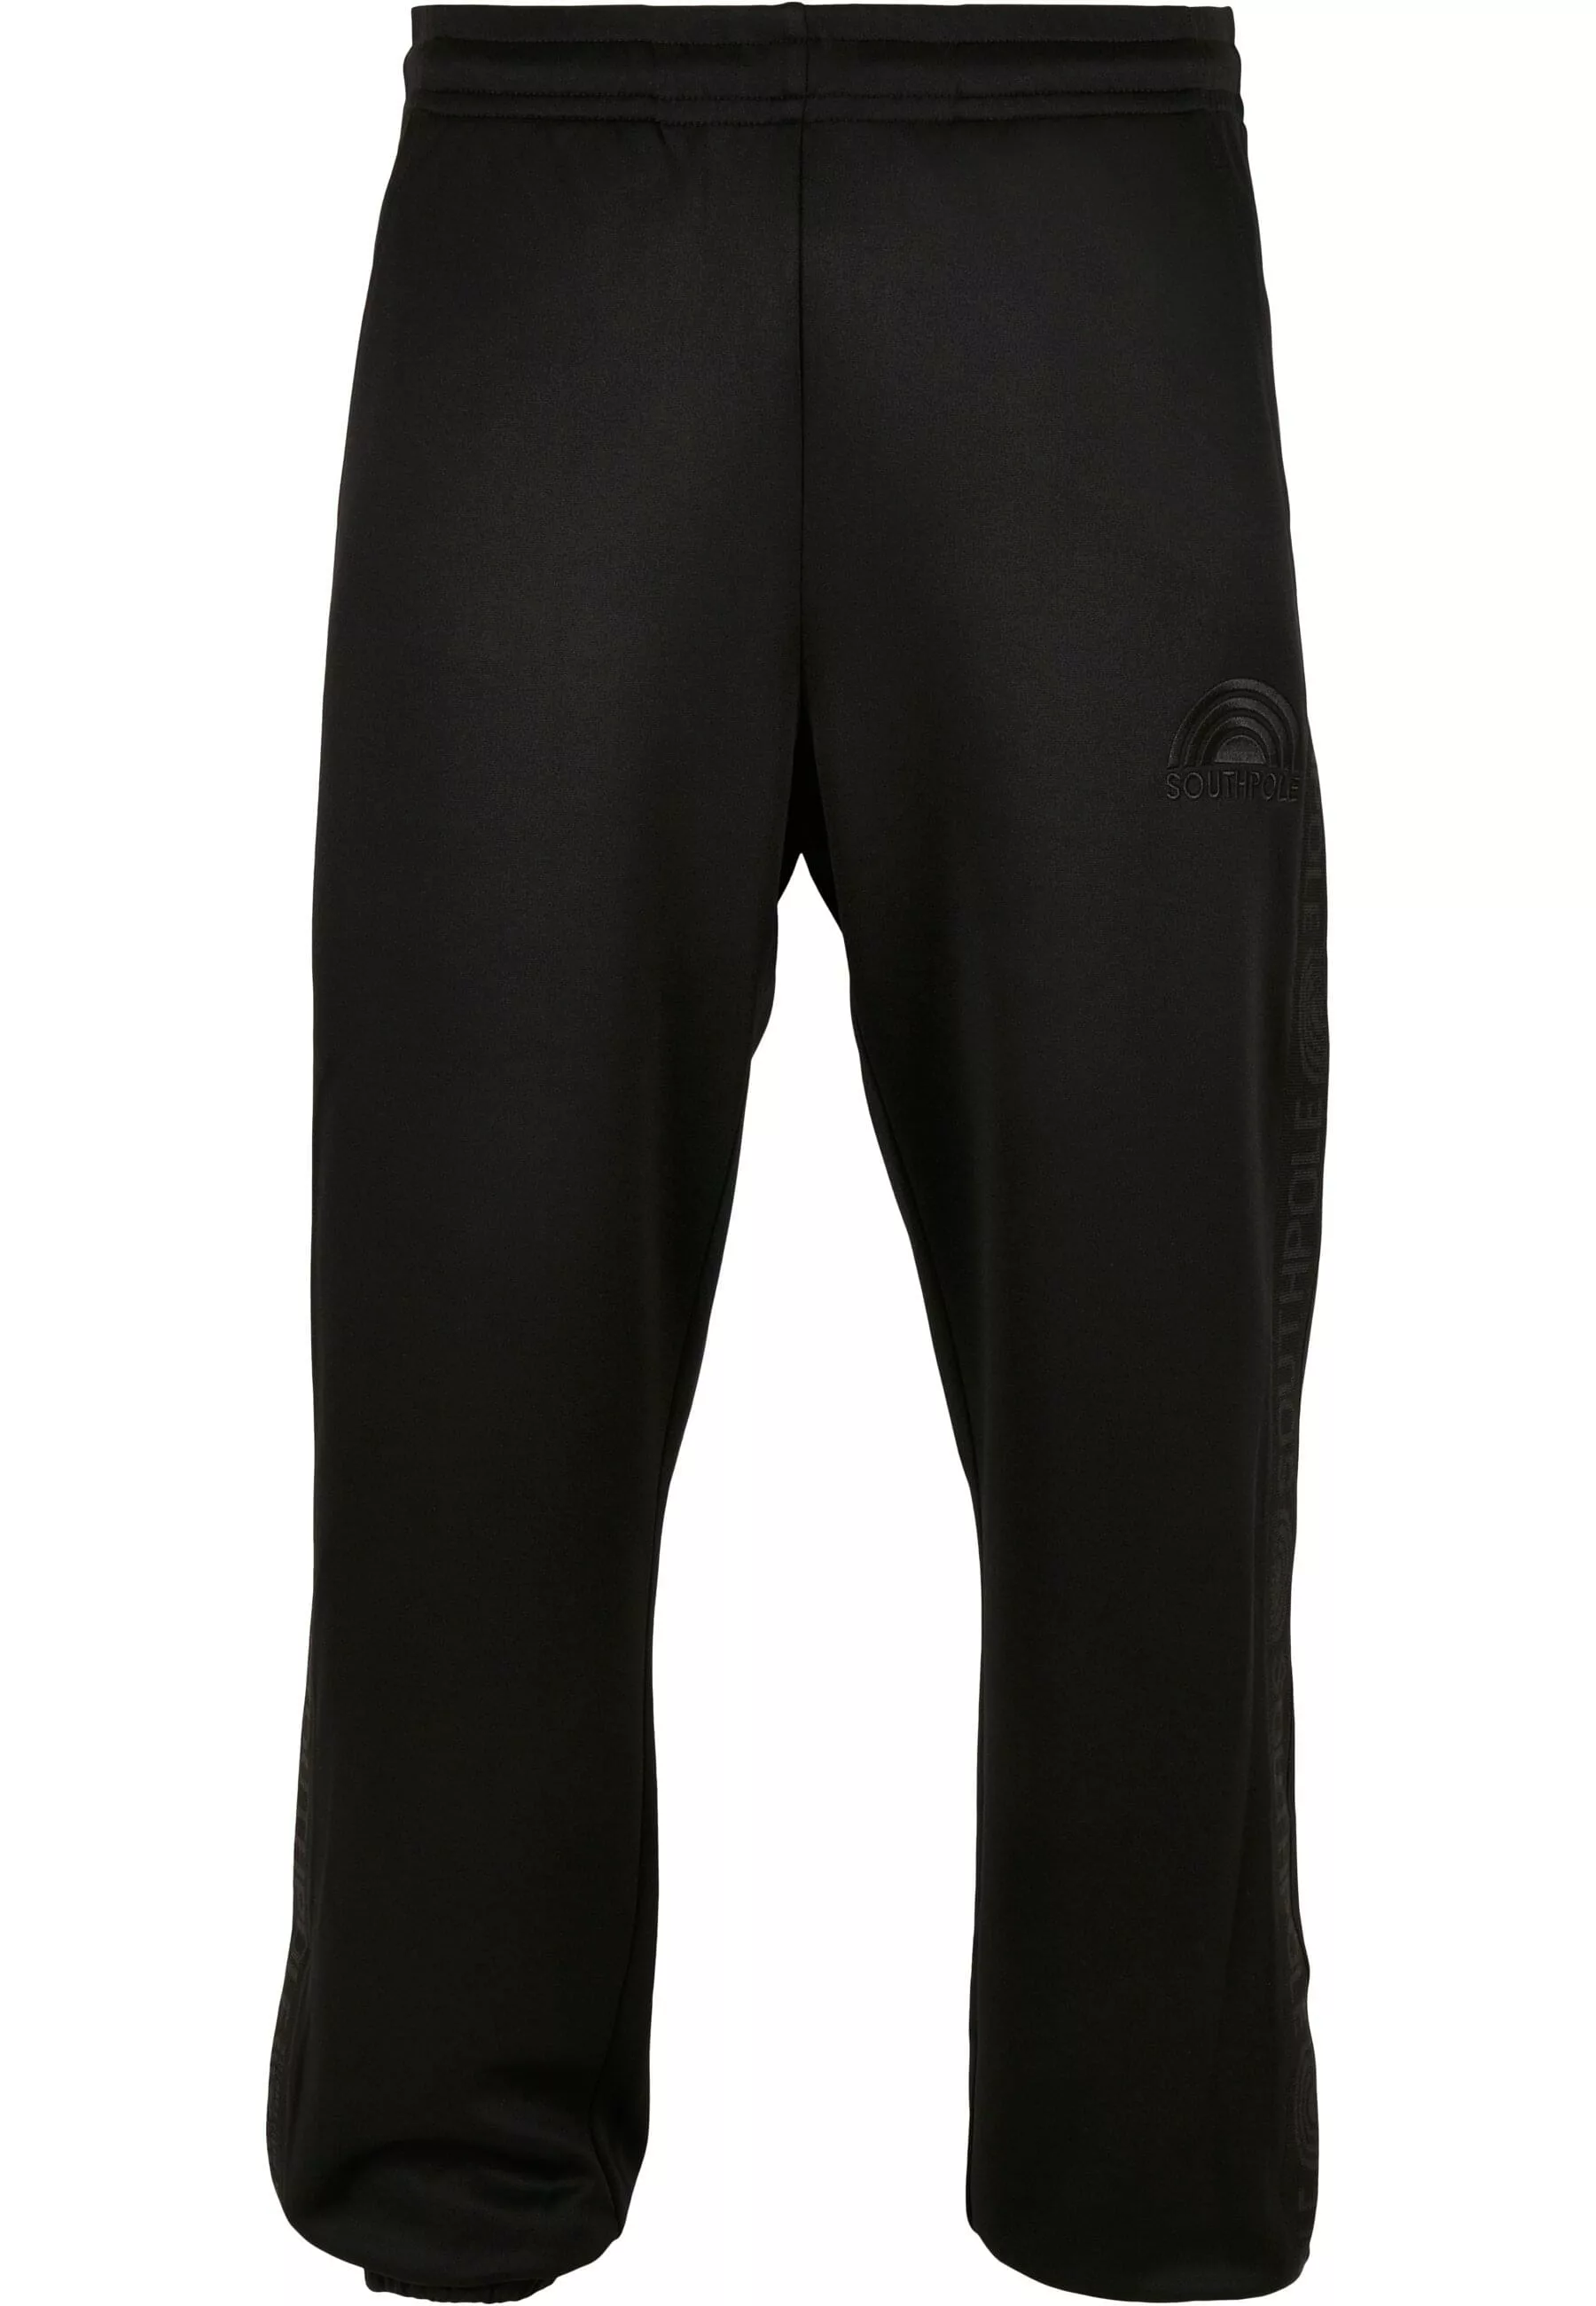 Southpole Stoffhose "Southpole Herren Southpole Tricot Pants with Tape", (1 günstig online kaufen